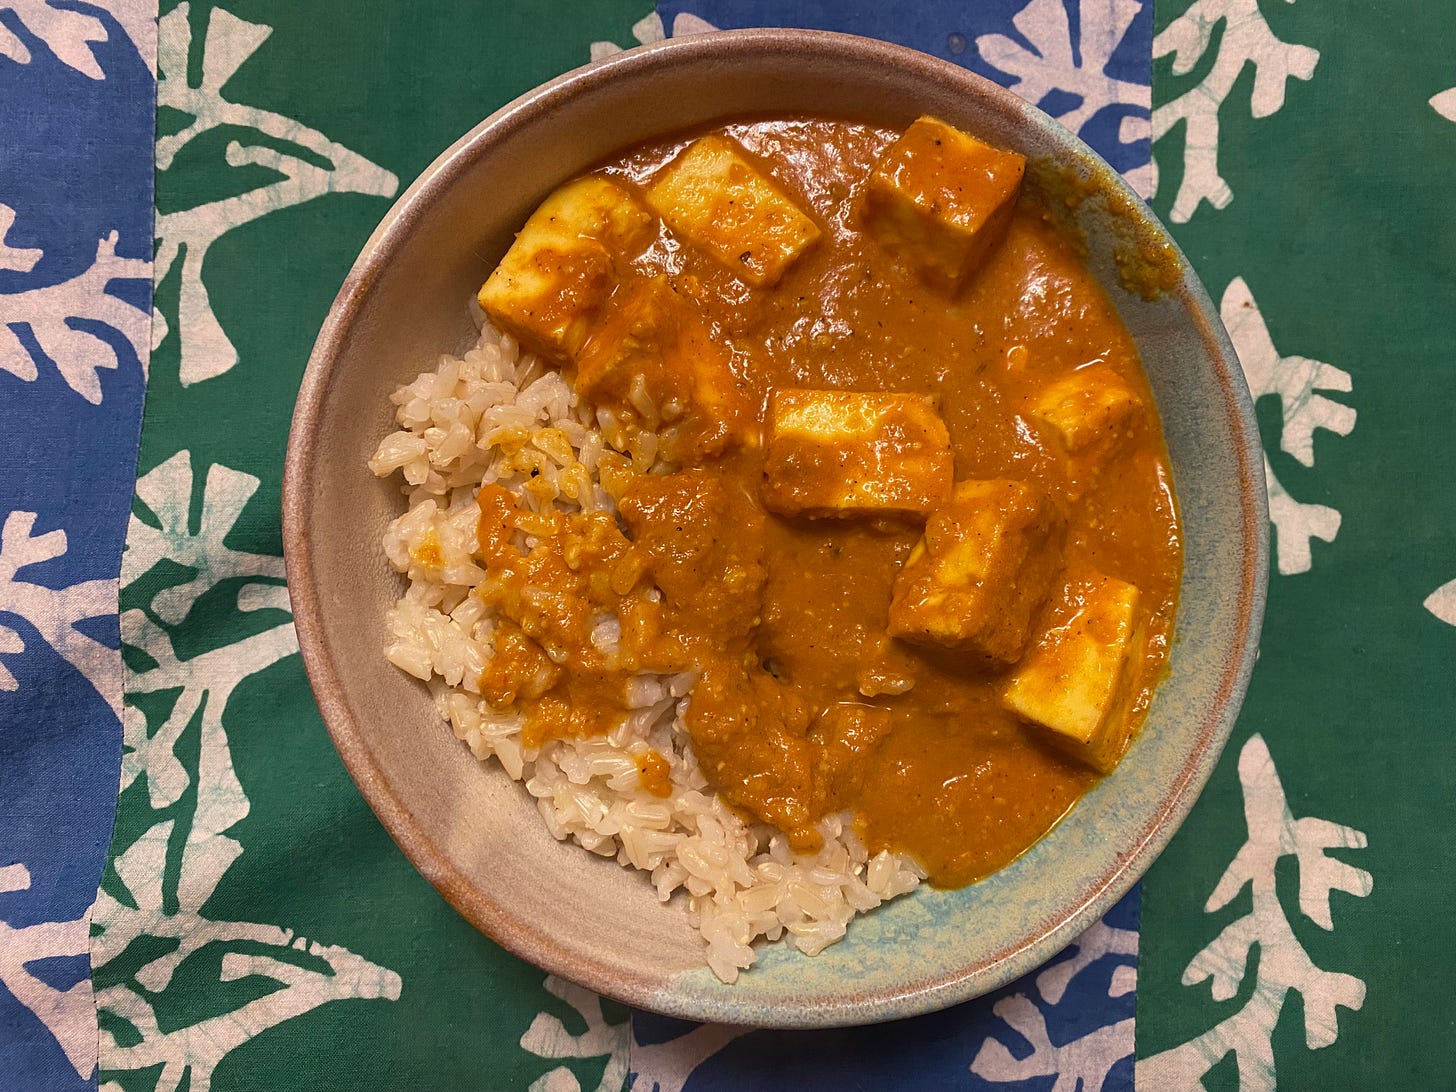 A ceramic bowl of rice and curry sits on a blue and green striped placemat. The deep orange sauce is thick and creamy, with large chunks of paneer.